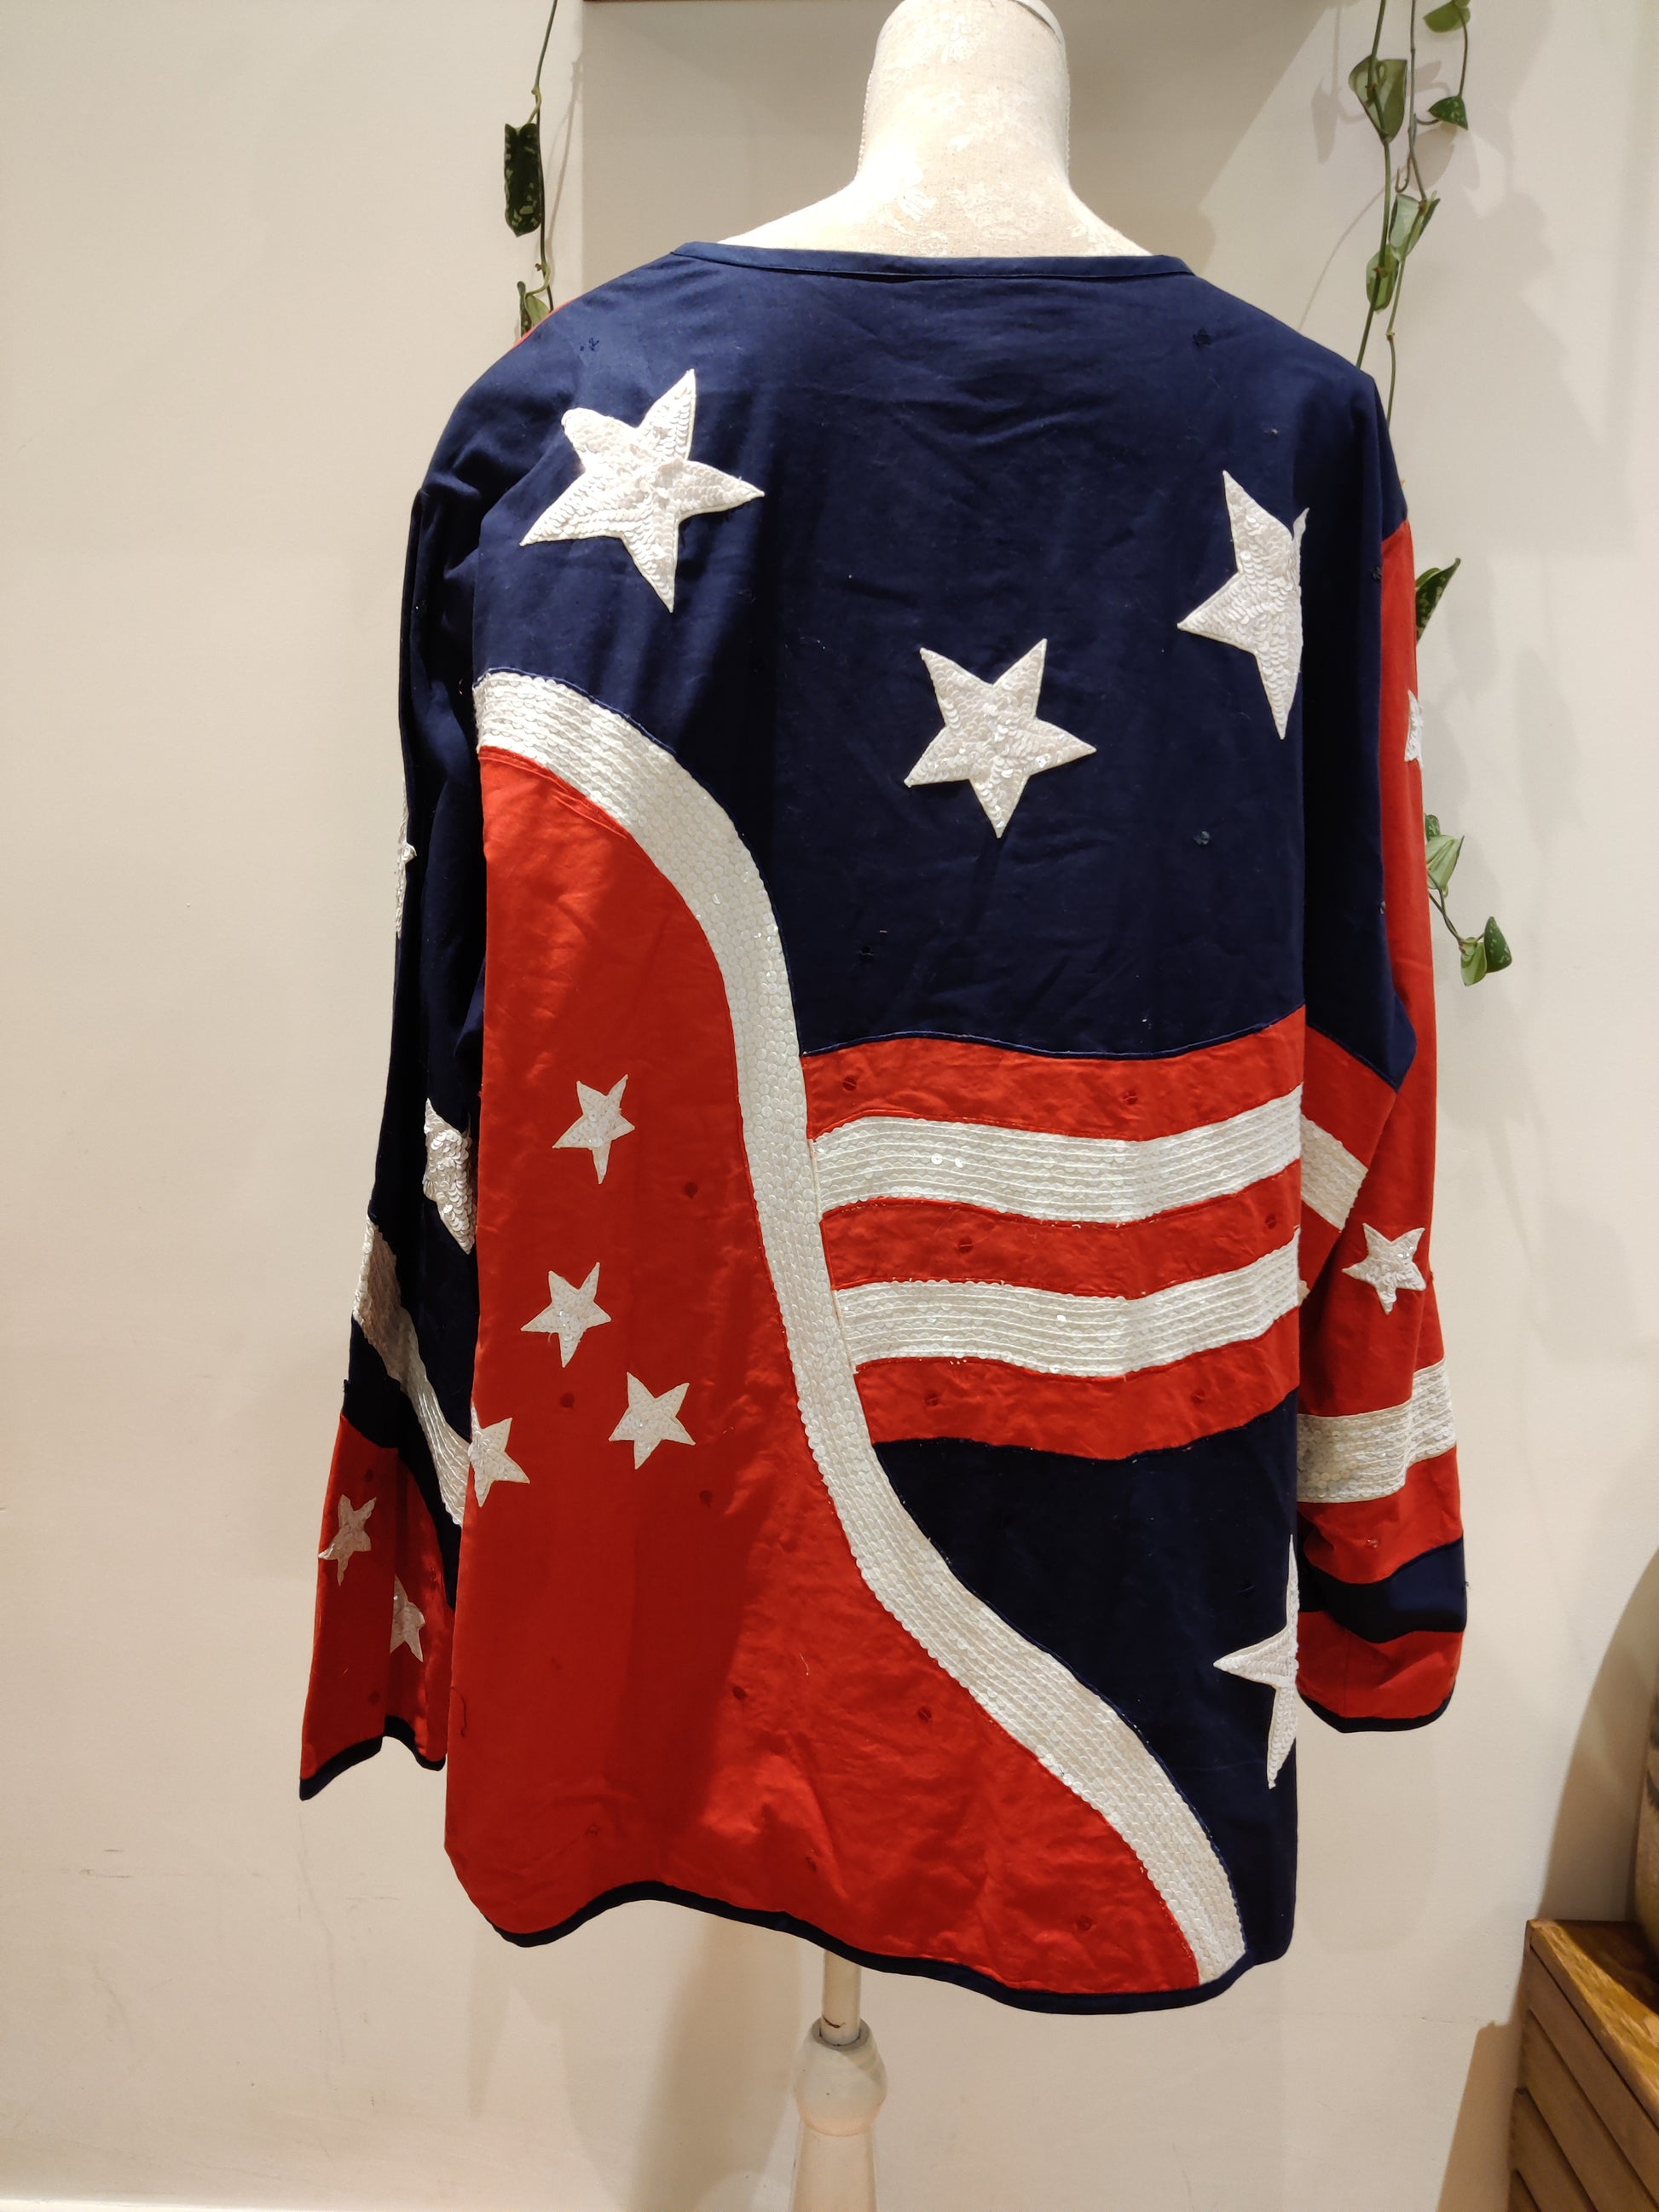 sparkly vintage jacket with American flag design. XXL.